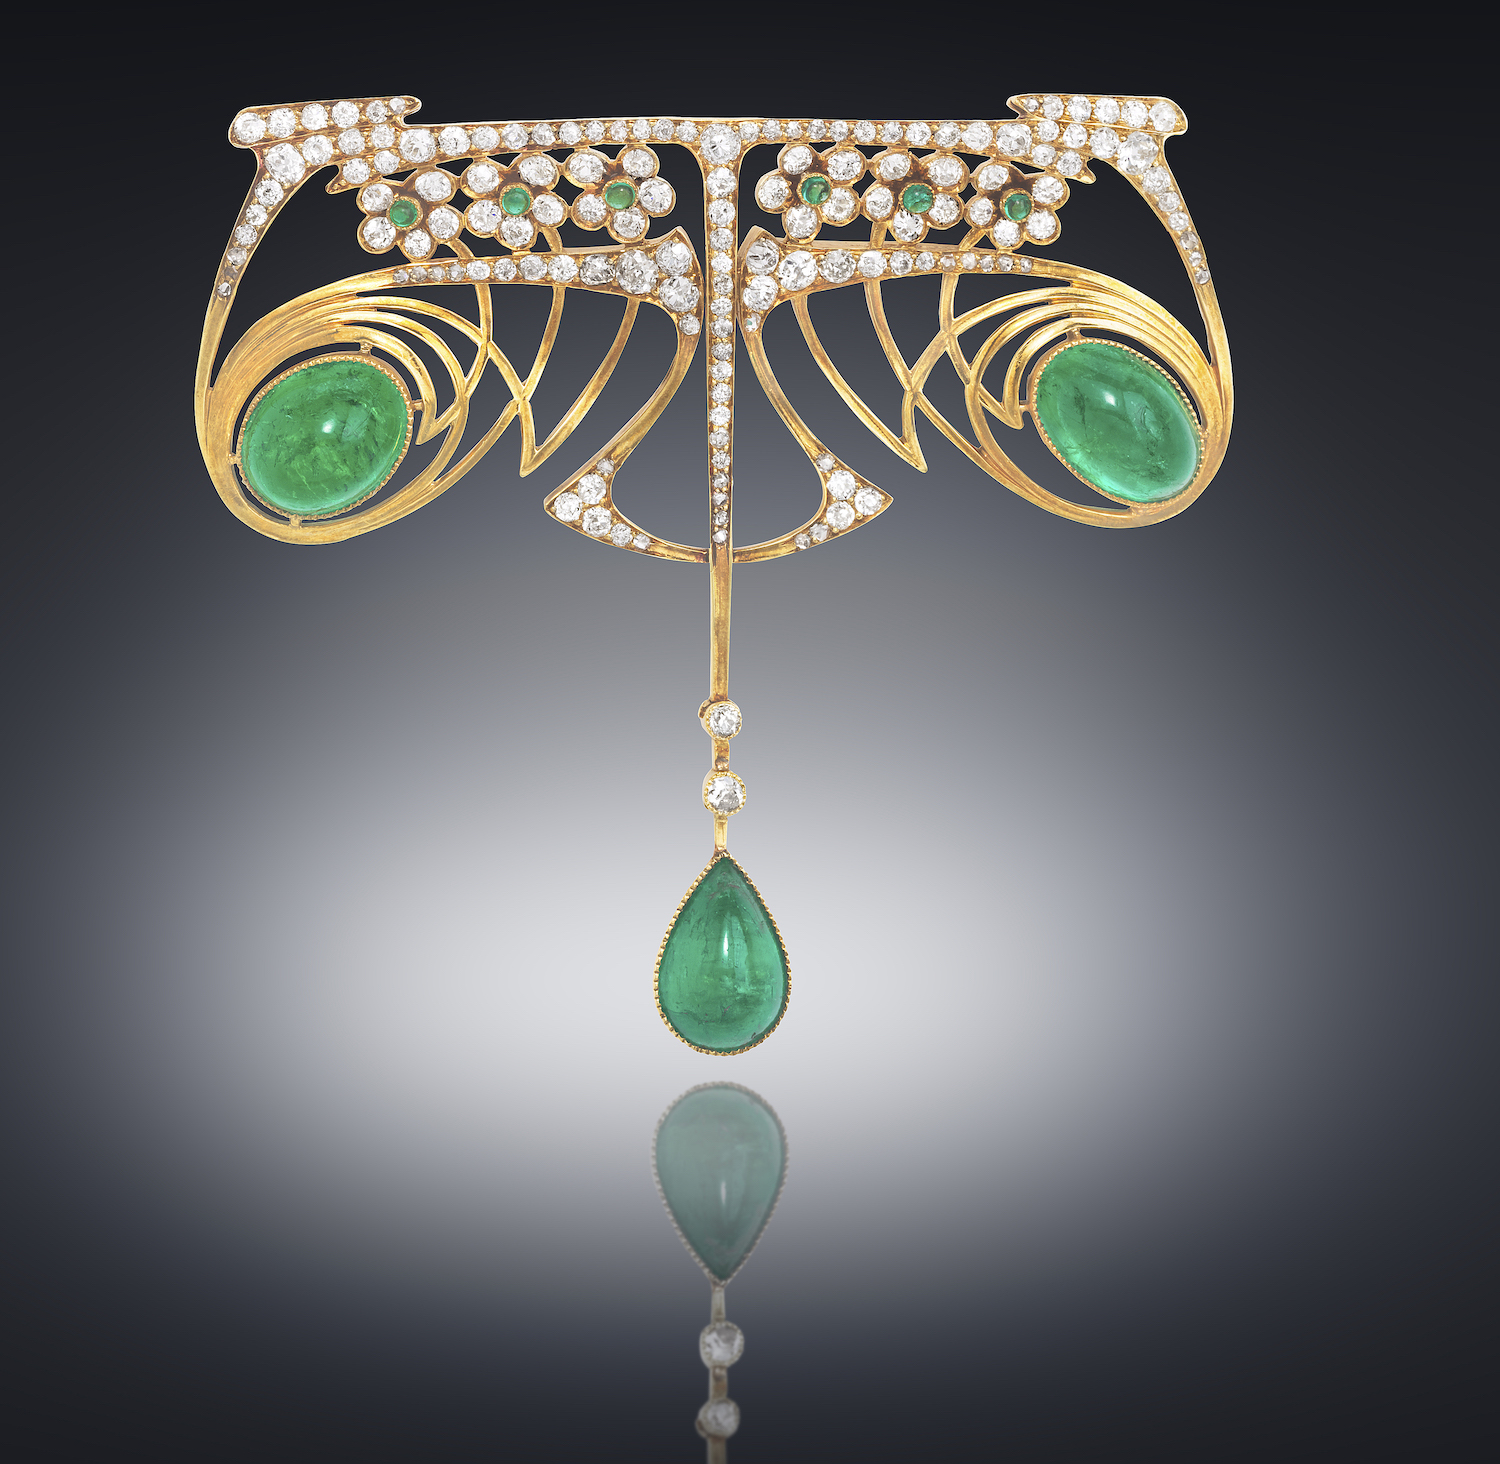 Theodore B. Starr (attr.) American Art Nouveau brooch, High style openwork graphic design in 18k gold and set with two large oval cabochon emeralds and one tear drop emerald (20 carats TW) with 144 old European round cut diamonds (approx. 9 carats TW) and six small cabochon emeralds as accents, c. 1900